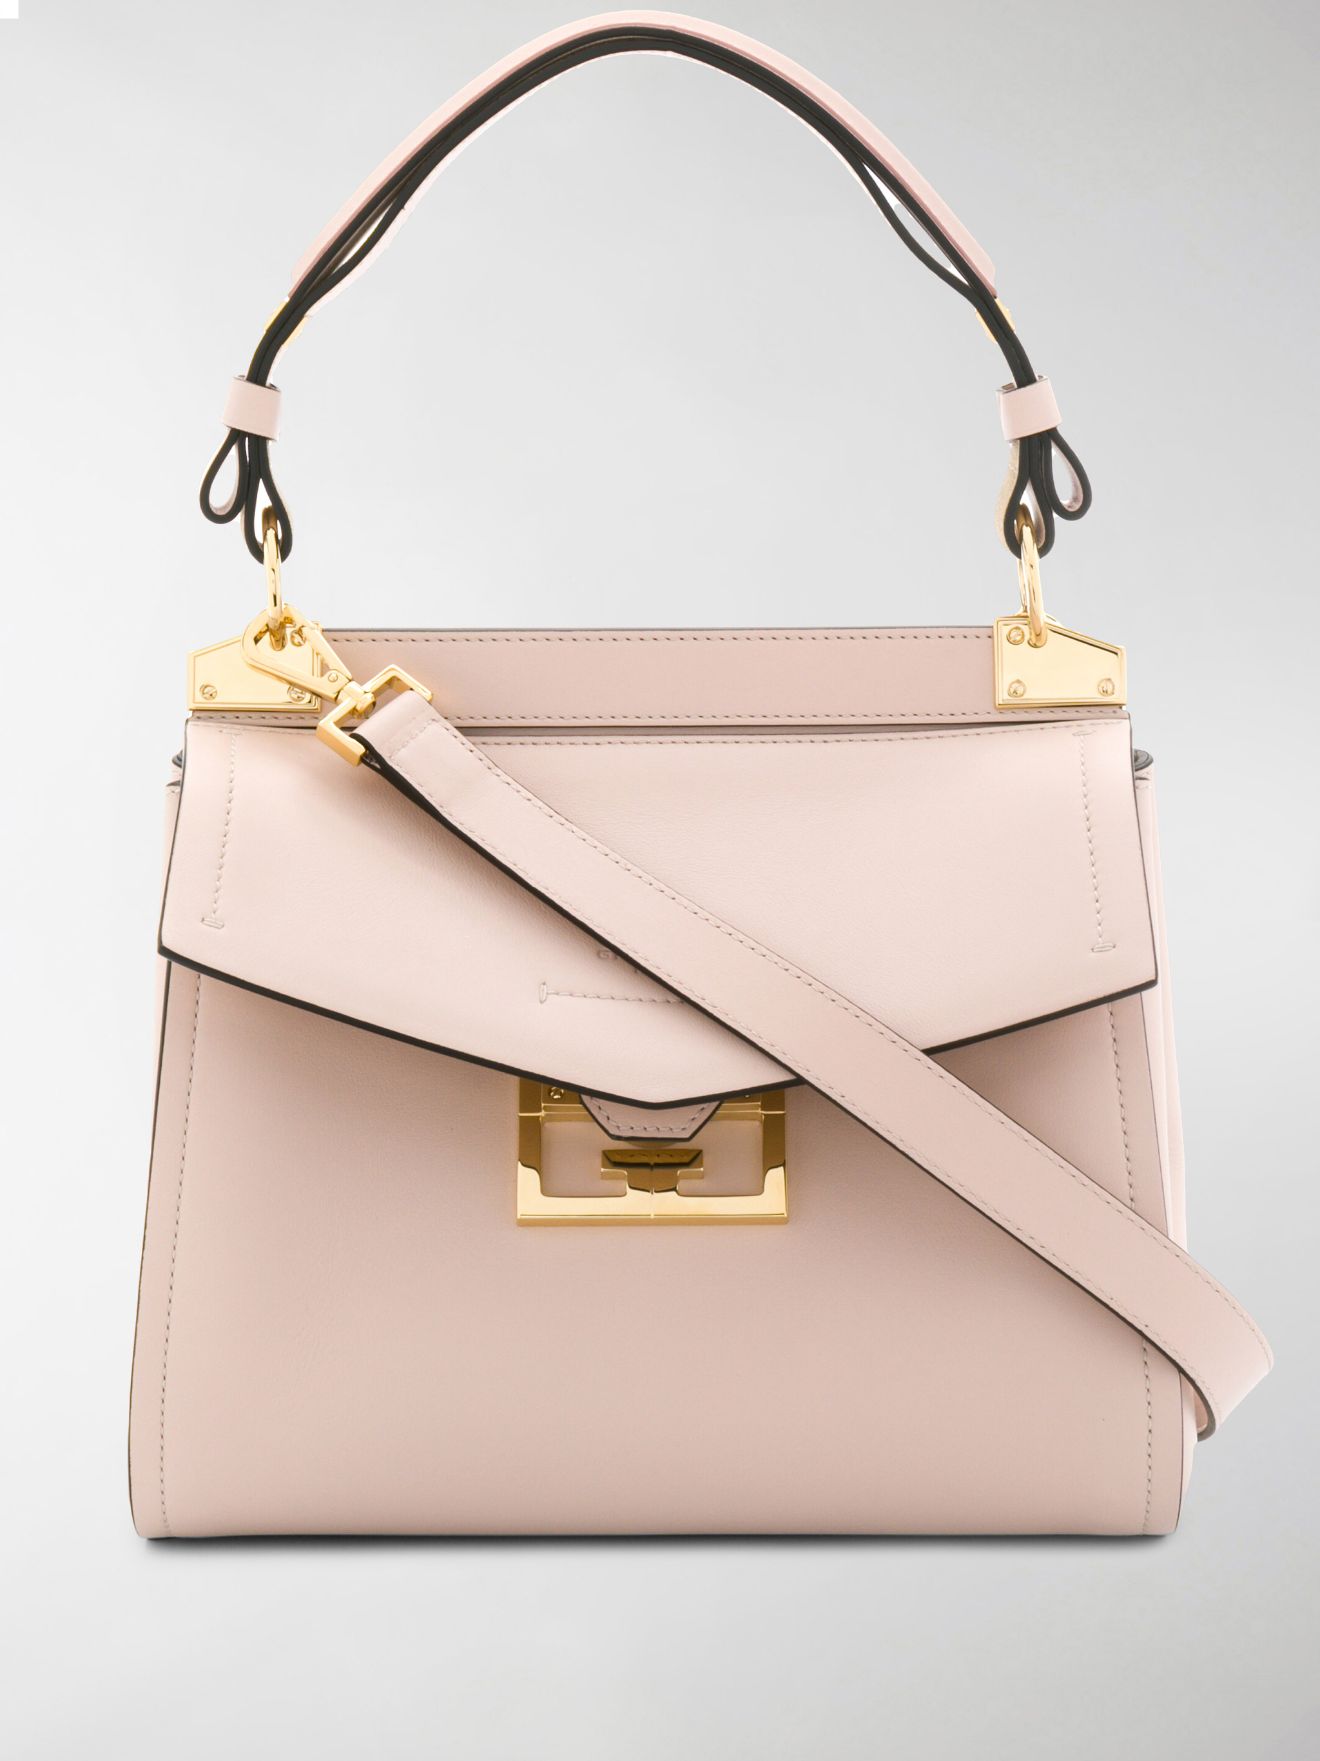 Givenchy Mystic tote bag pink | MODES